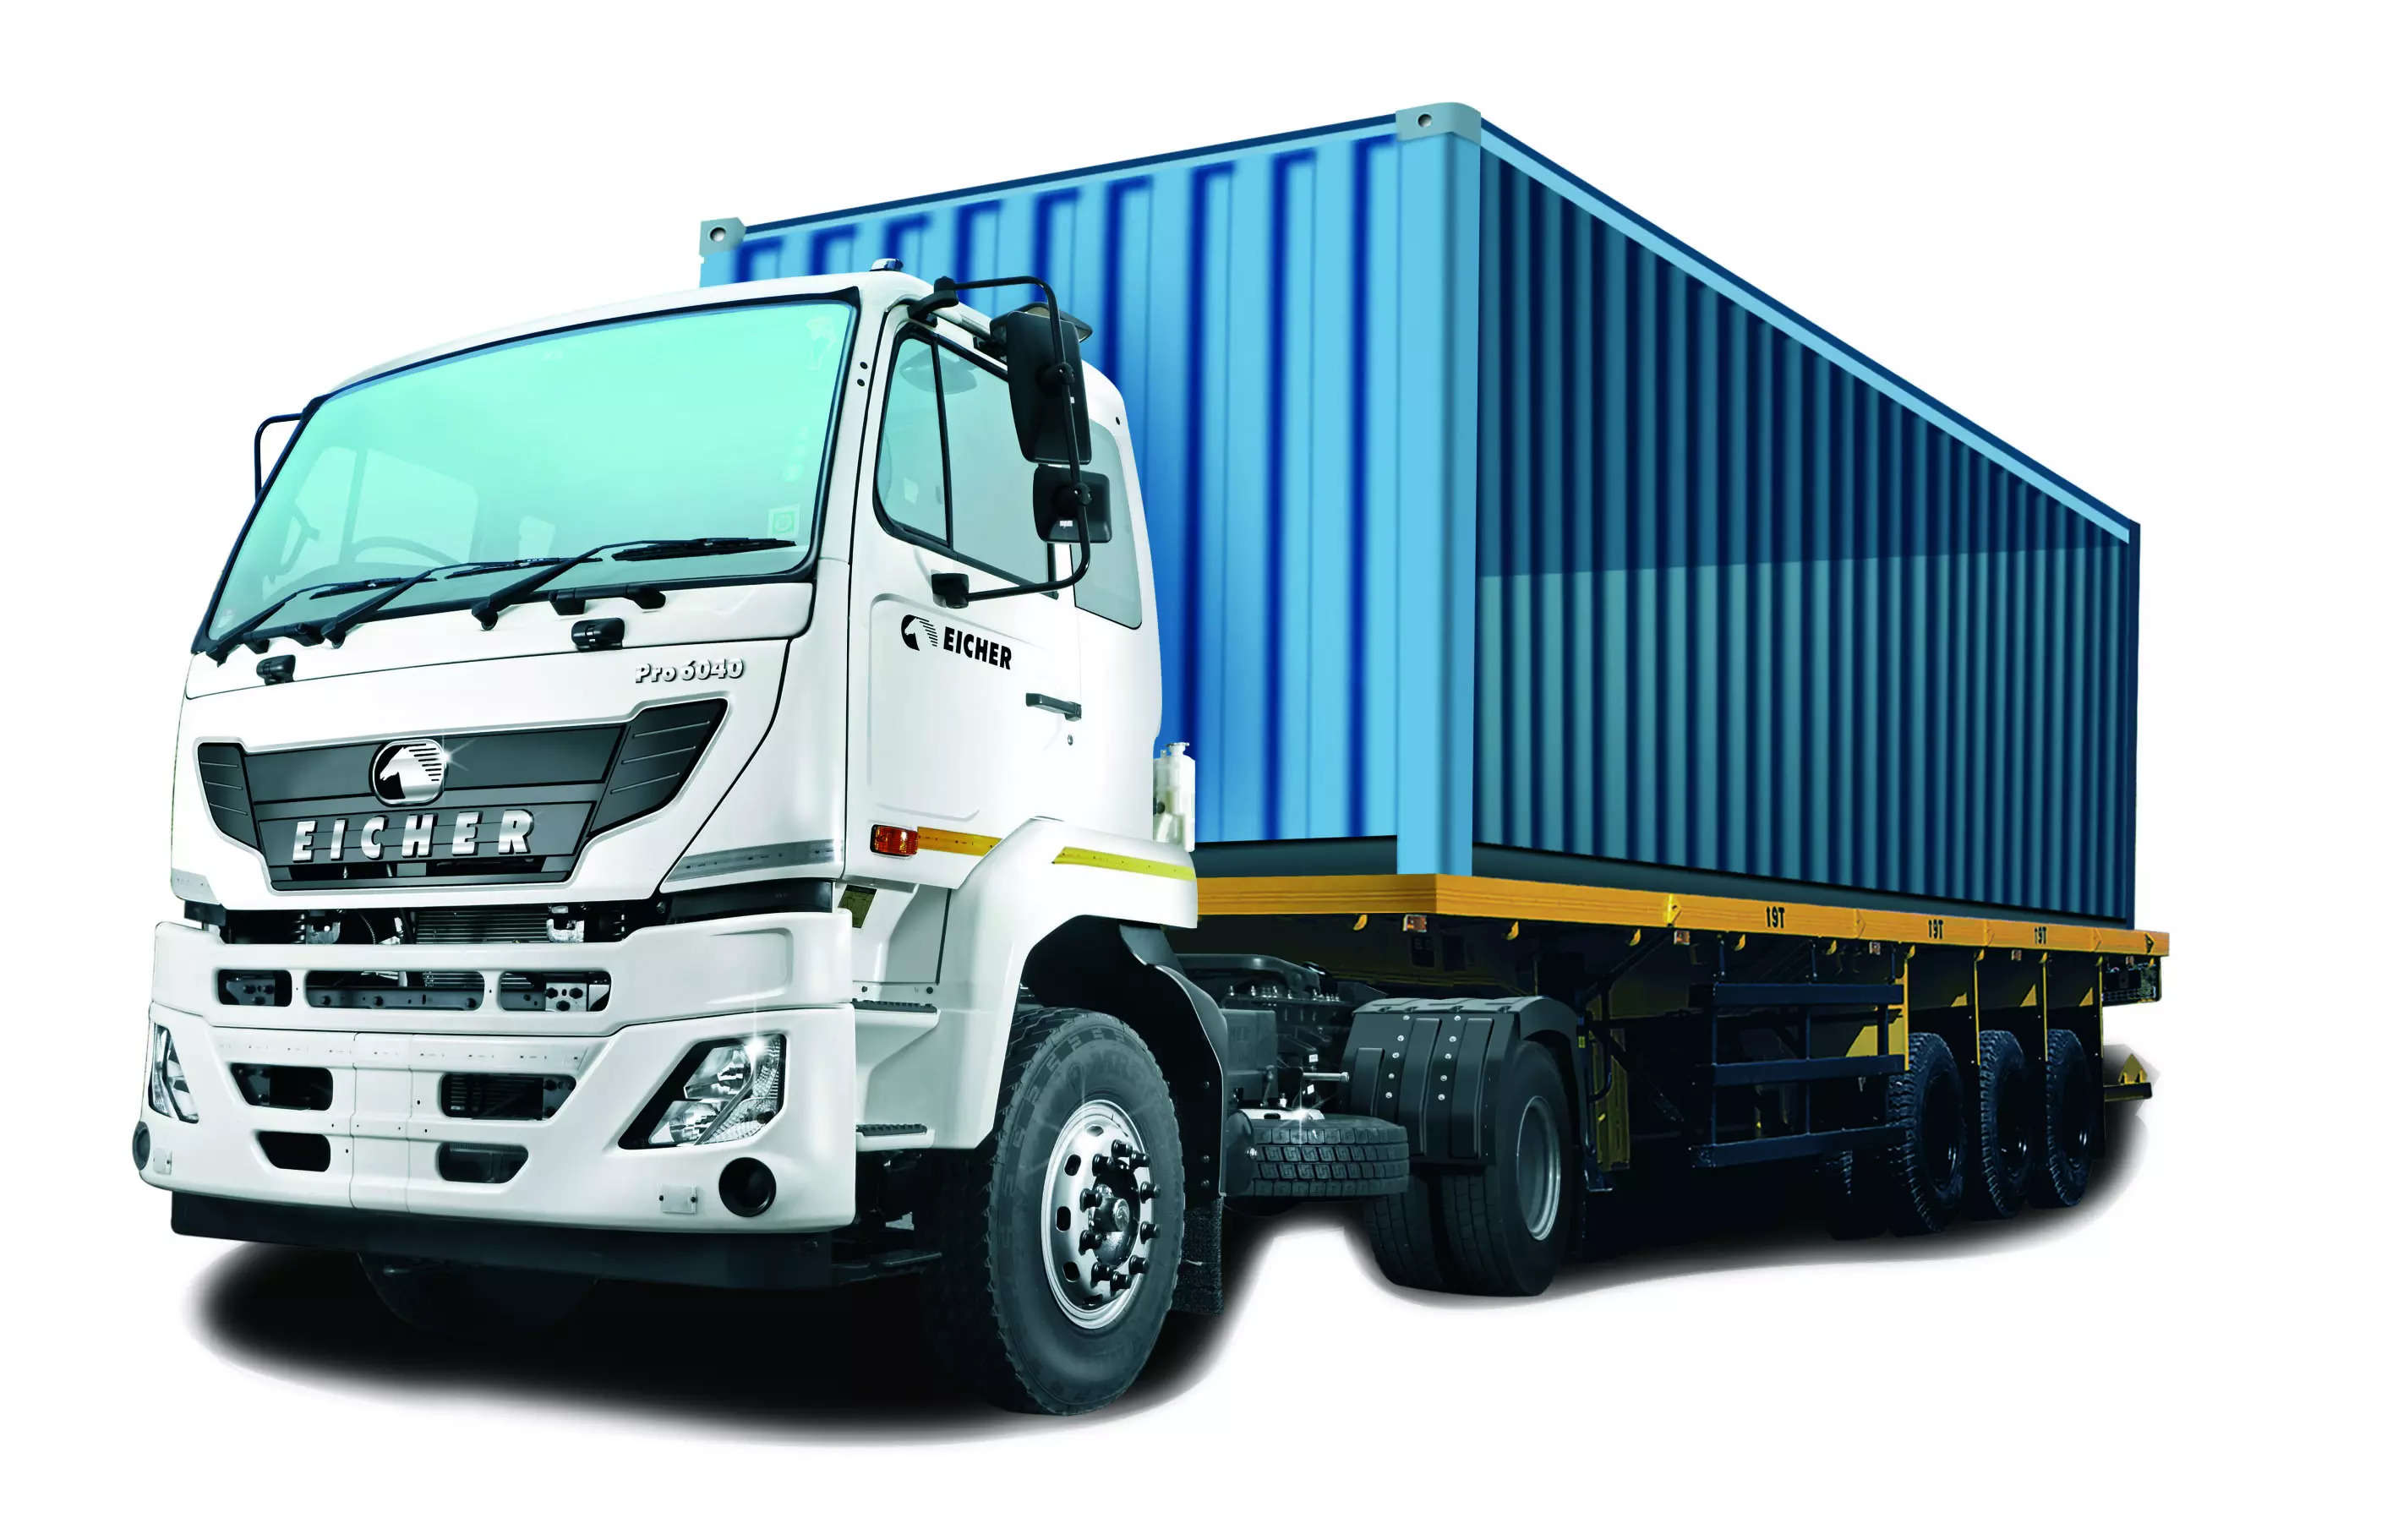 <p>The MoU was formalized through the signatures of Prof. Suhas S. Joshi, Director of IIT Indore, and Rajinder Singh Sachdeva, Chief Operating Officer of VE Commercial Vehicles.</p>